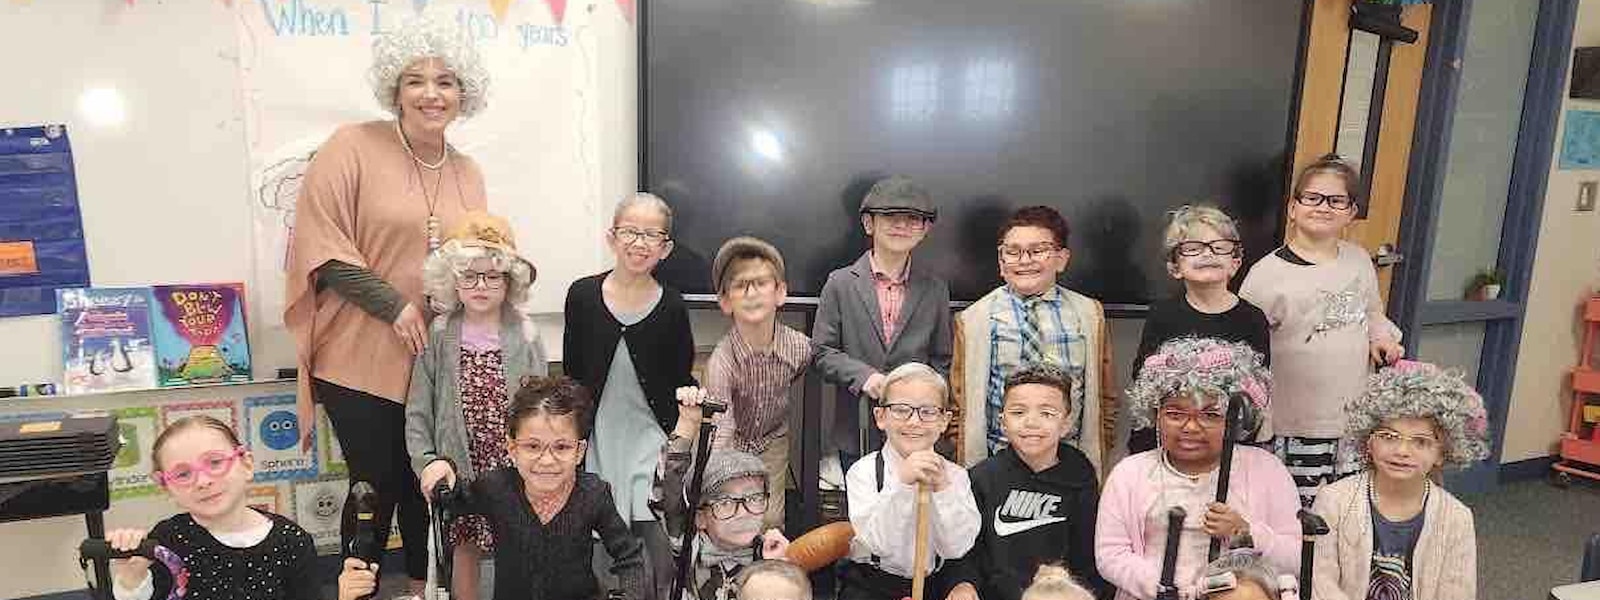 students dressed as 100 year old people